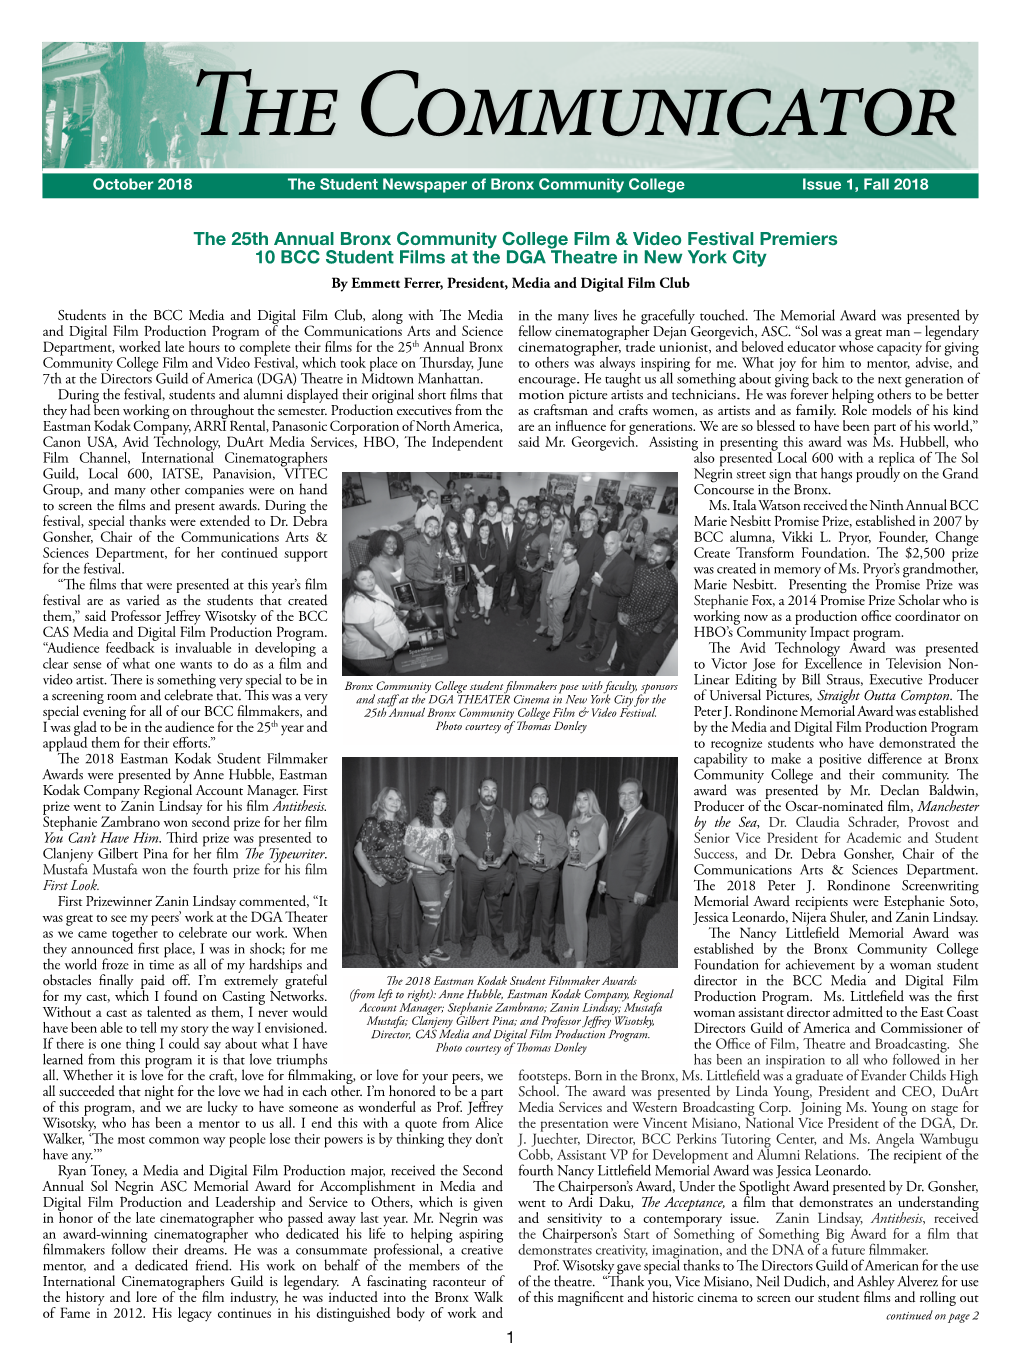 The Communicator October 2018 the Student Newspaper of Bronx Community College Issue 1, Fall 2018